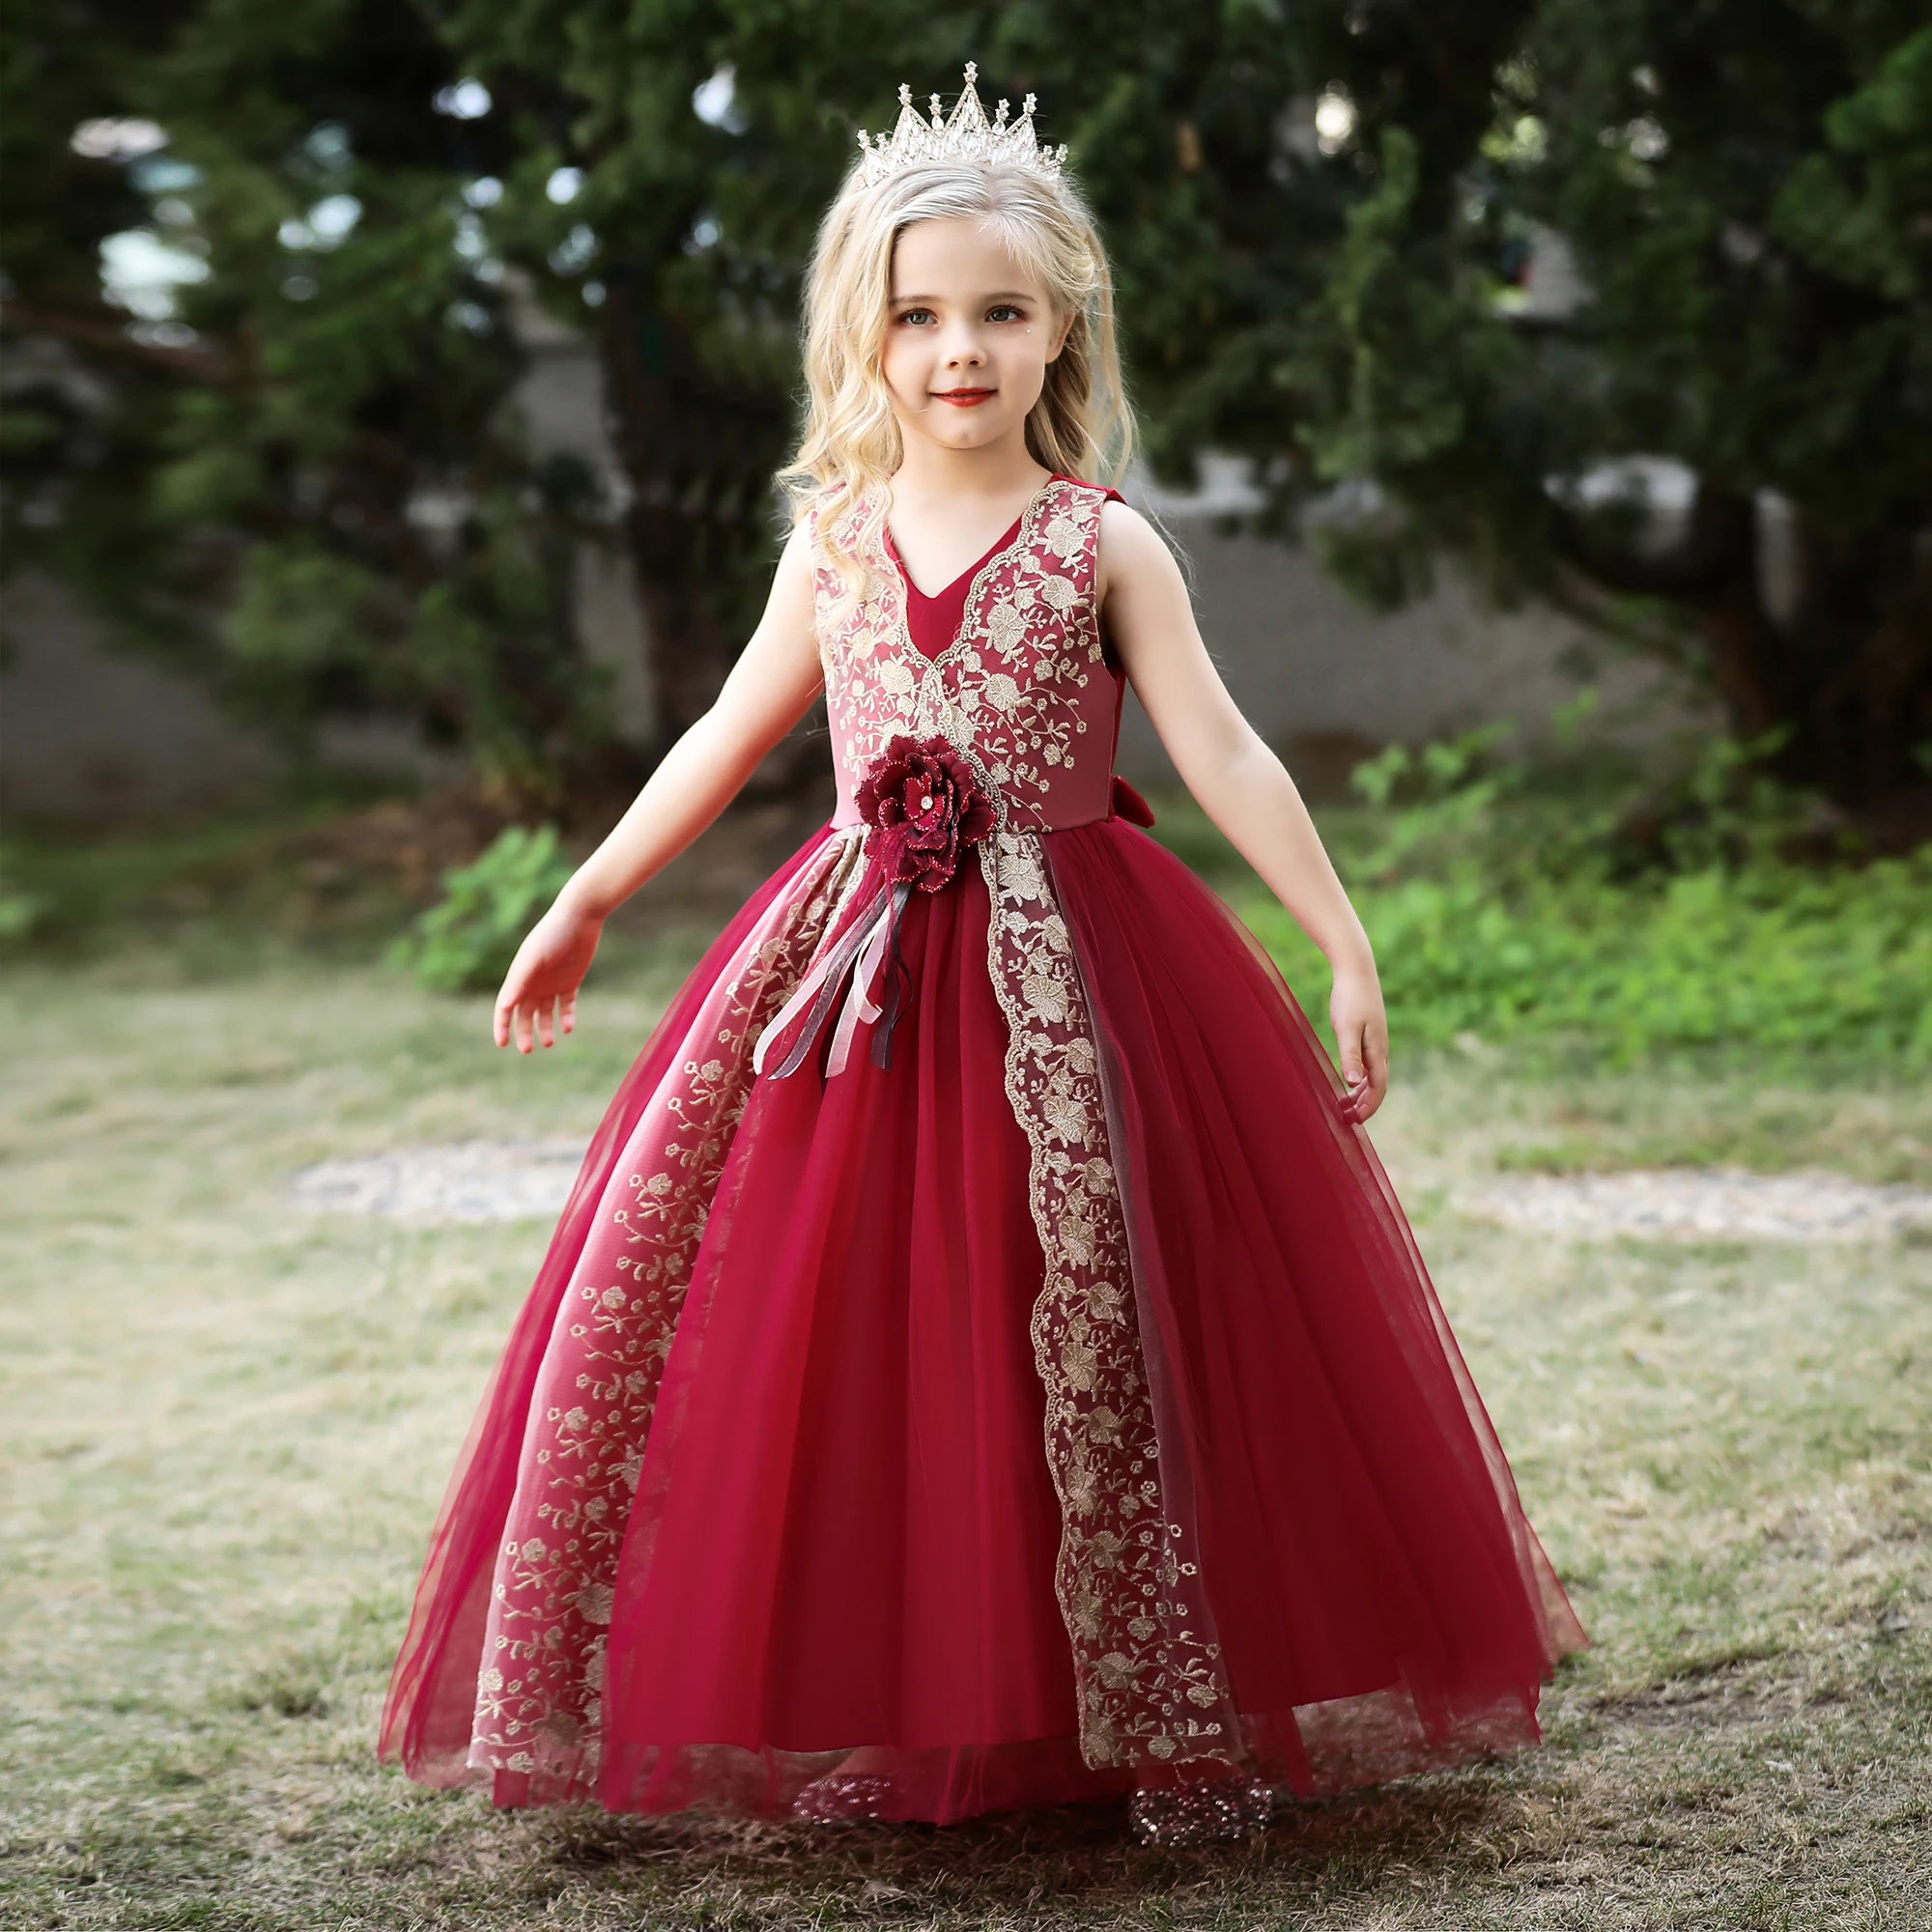 

FSMKTZ New Arrival Princess Ball Gown For Kids Pink Wedding Dresses For Little Girls Luxury Lace Tulle Party Dress LP-255, White,blue,pink,gray,peach,champagne,red